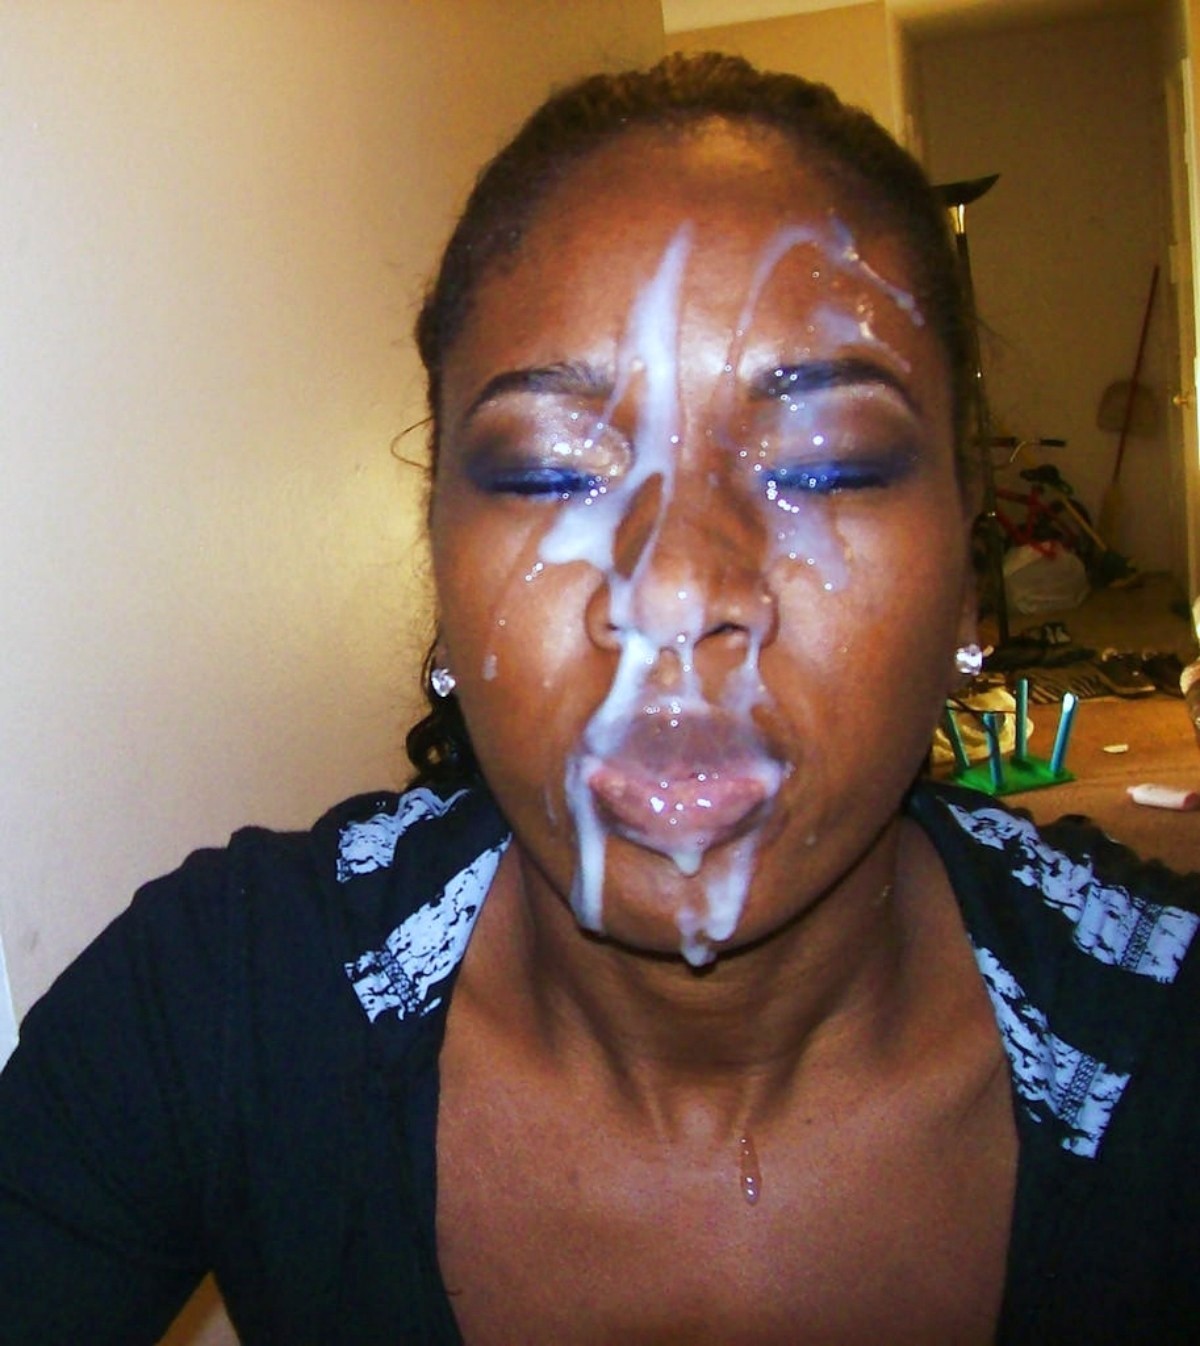 Black Babes Sprayed With Man Juice 21 Pic Of 29